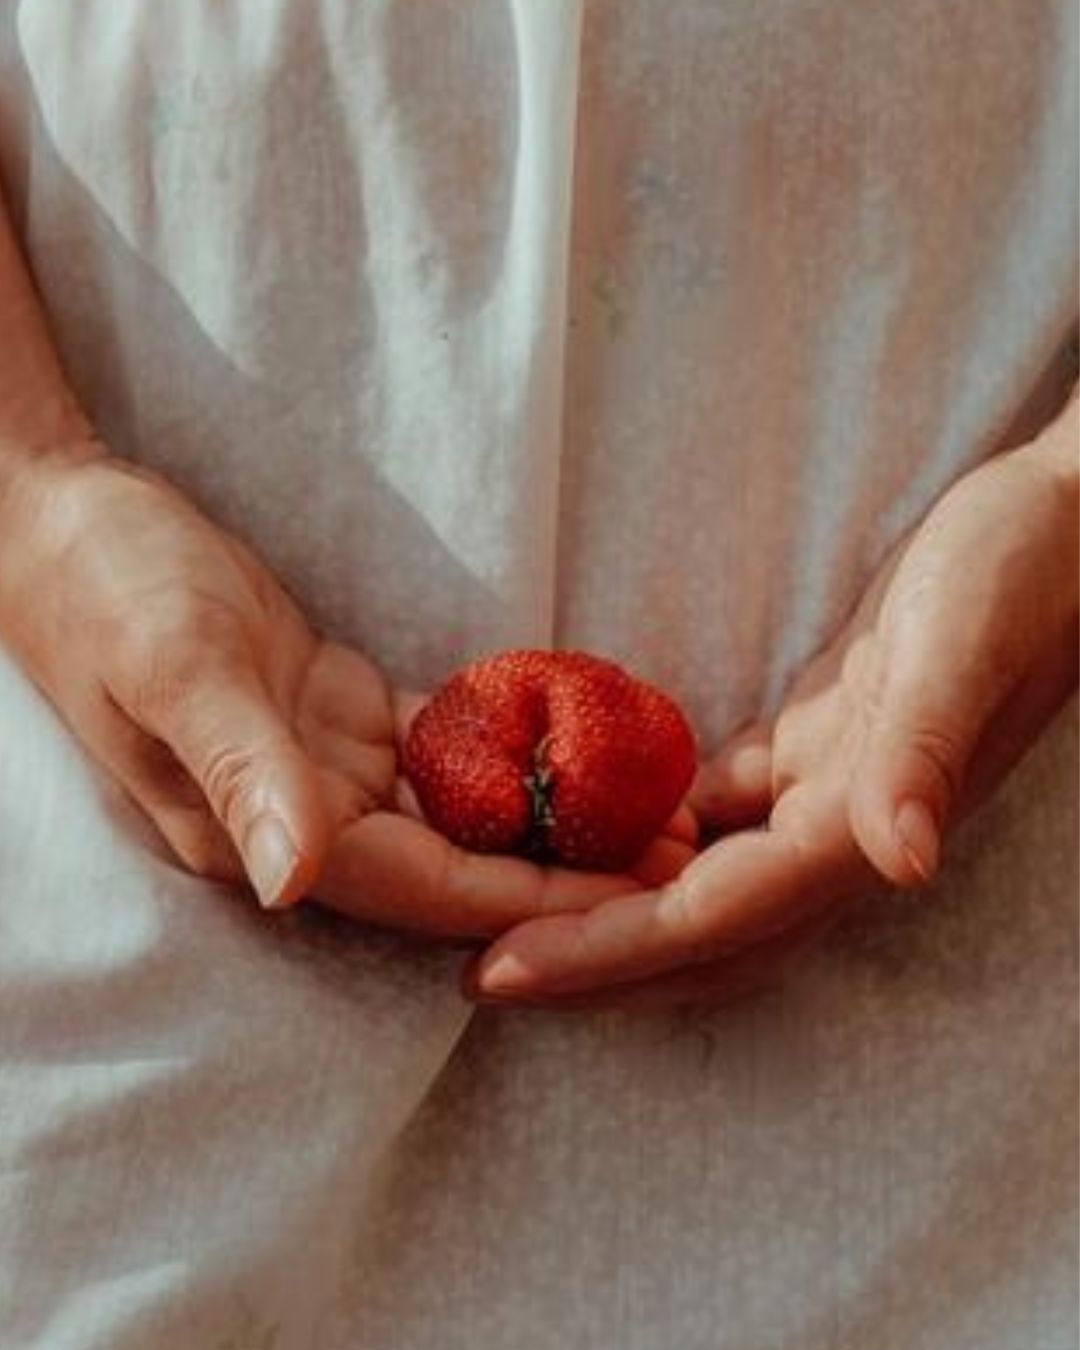 EVERY WOMAN SHOULD KNOW: What's a strawberry Cervix?